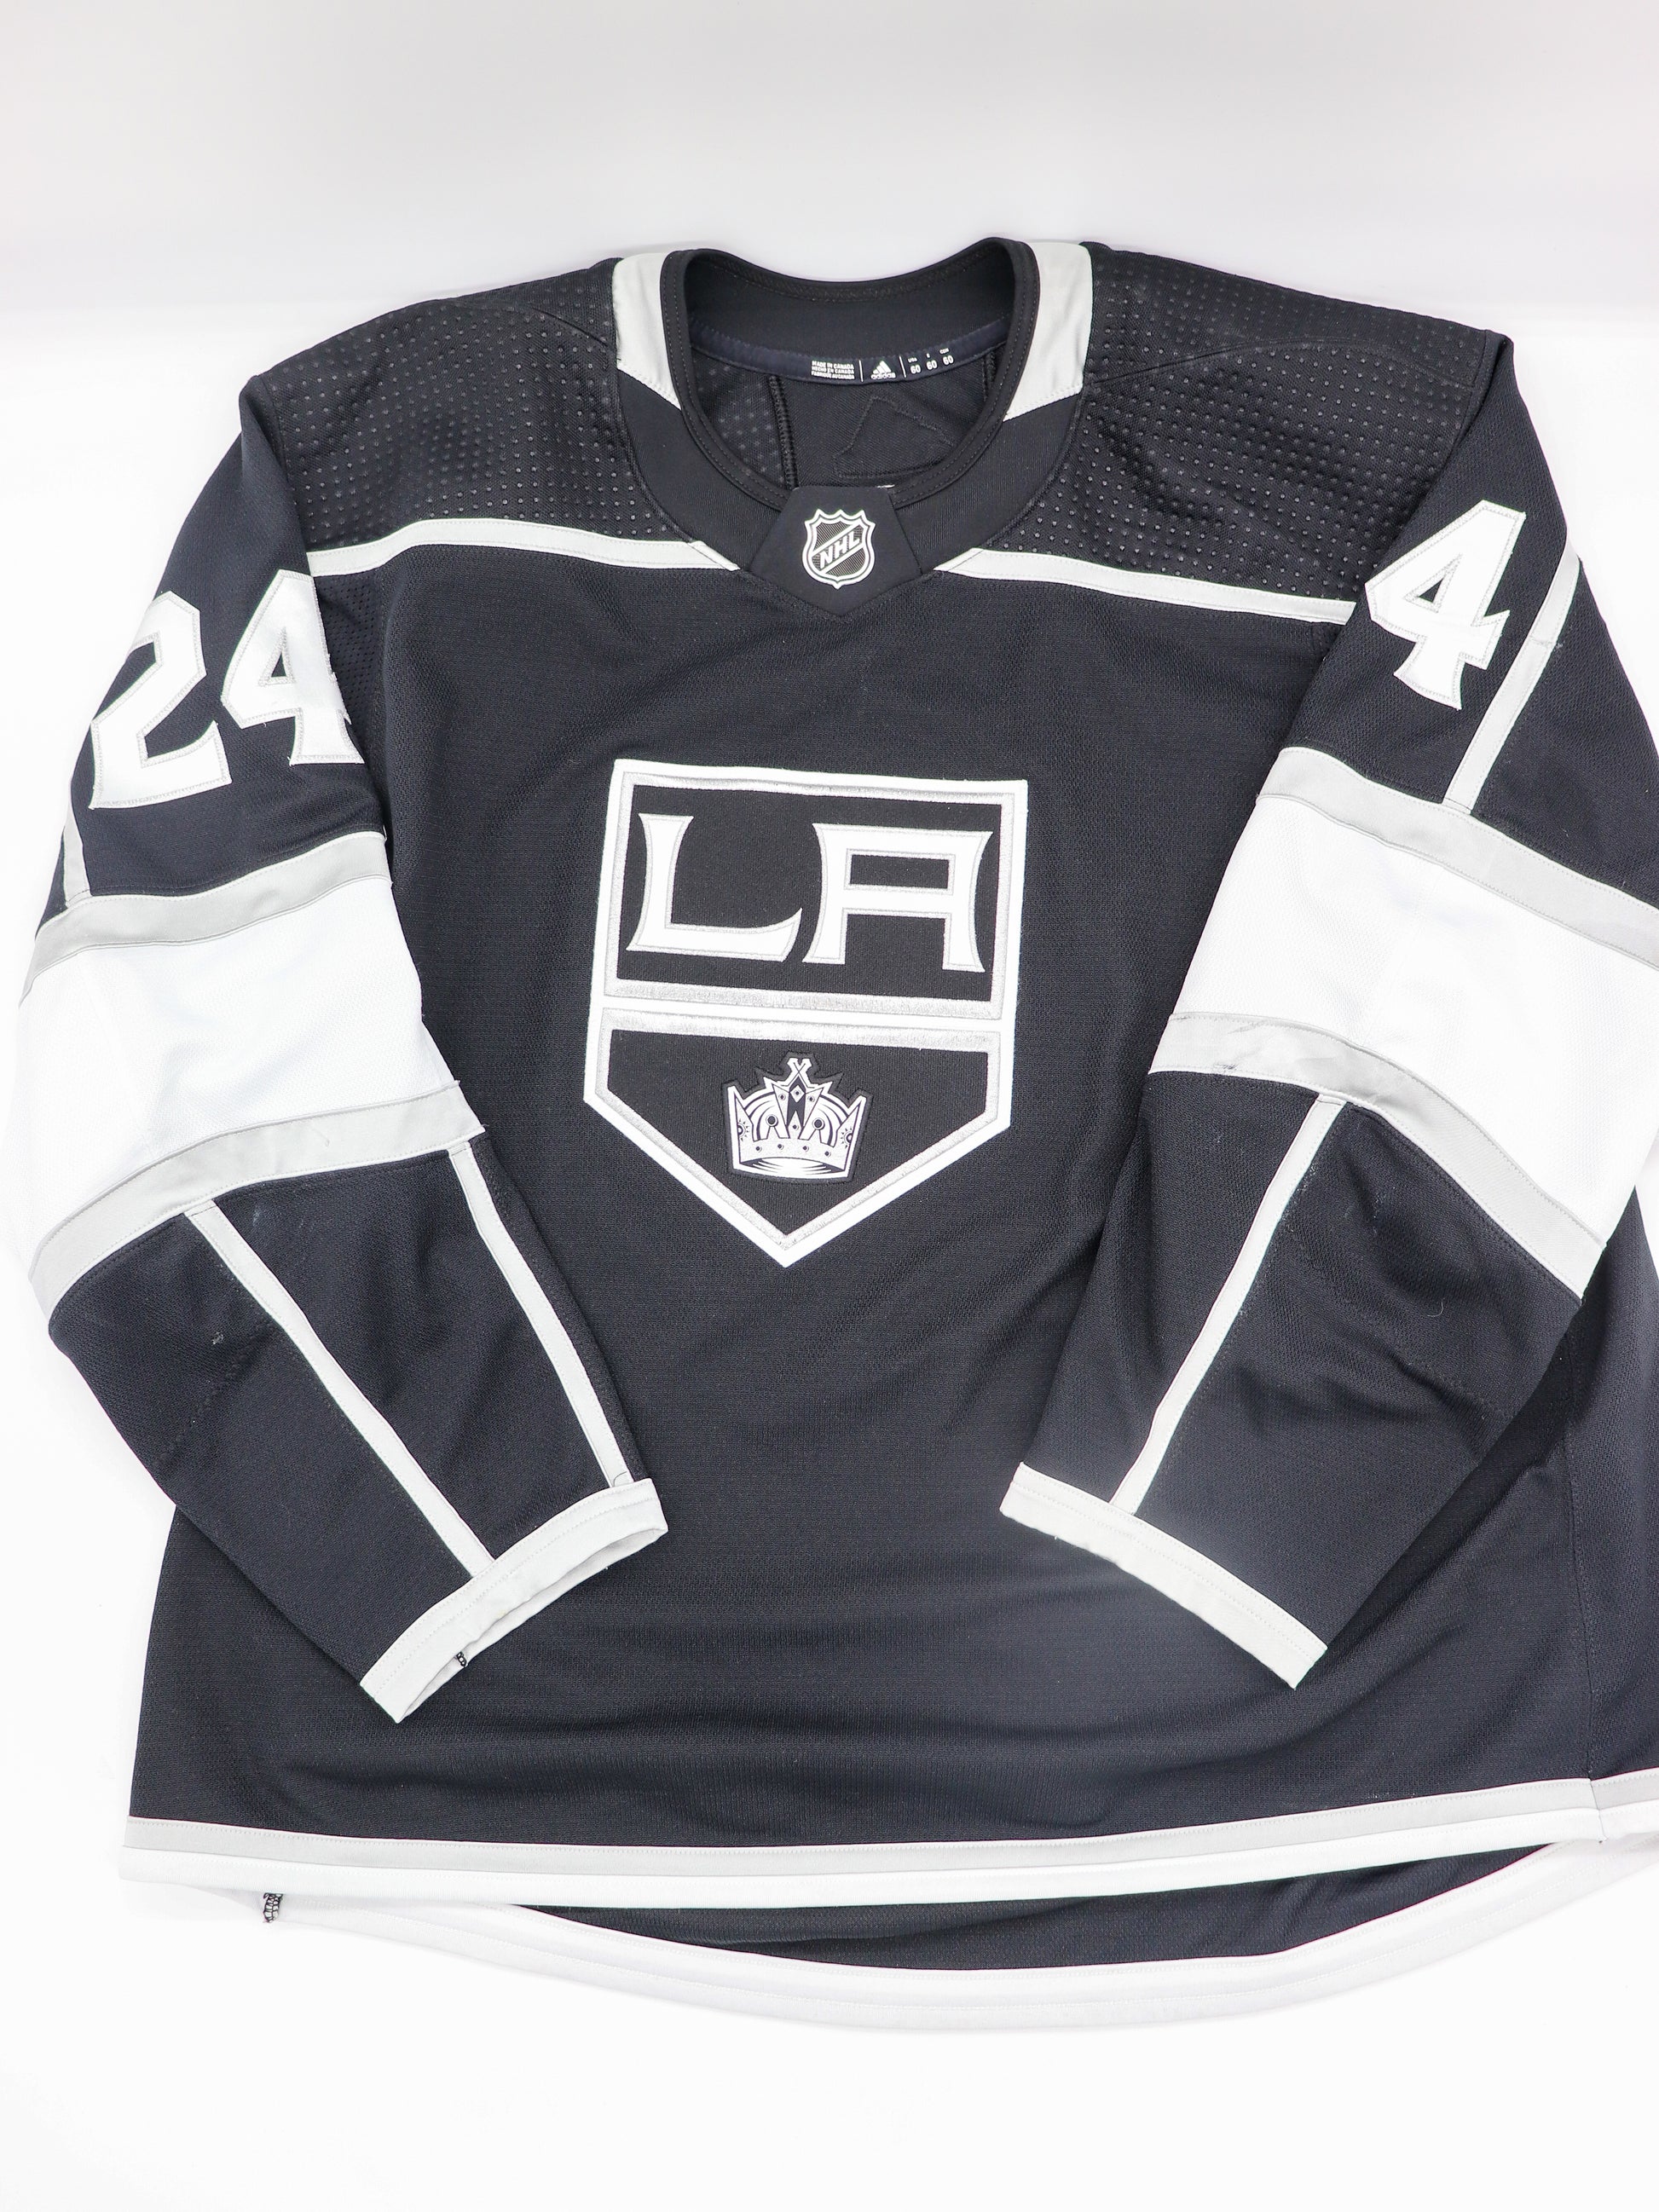 to Die for Collectibles 2018-19 Game Worn Los Angeles Kings #24 Derek Forbort Black Home Jersey, Adidas Size 60